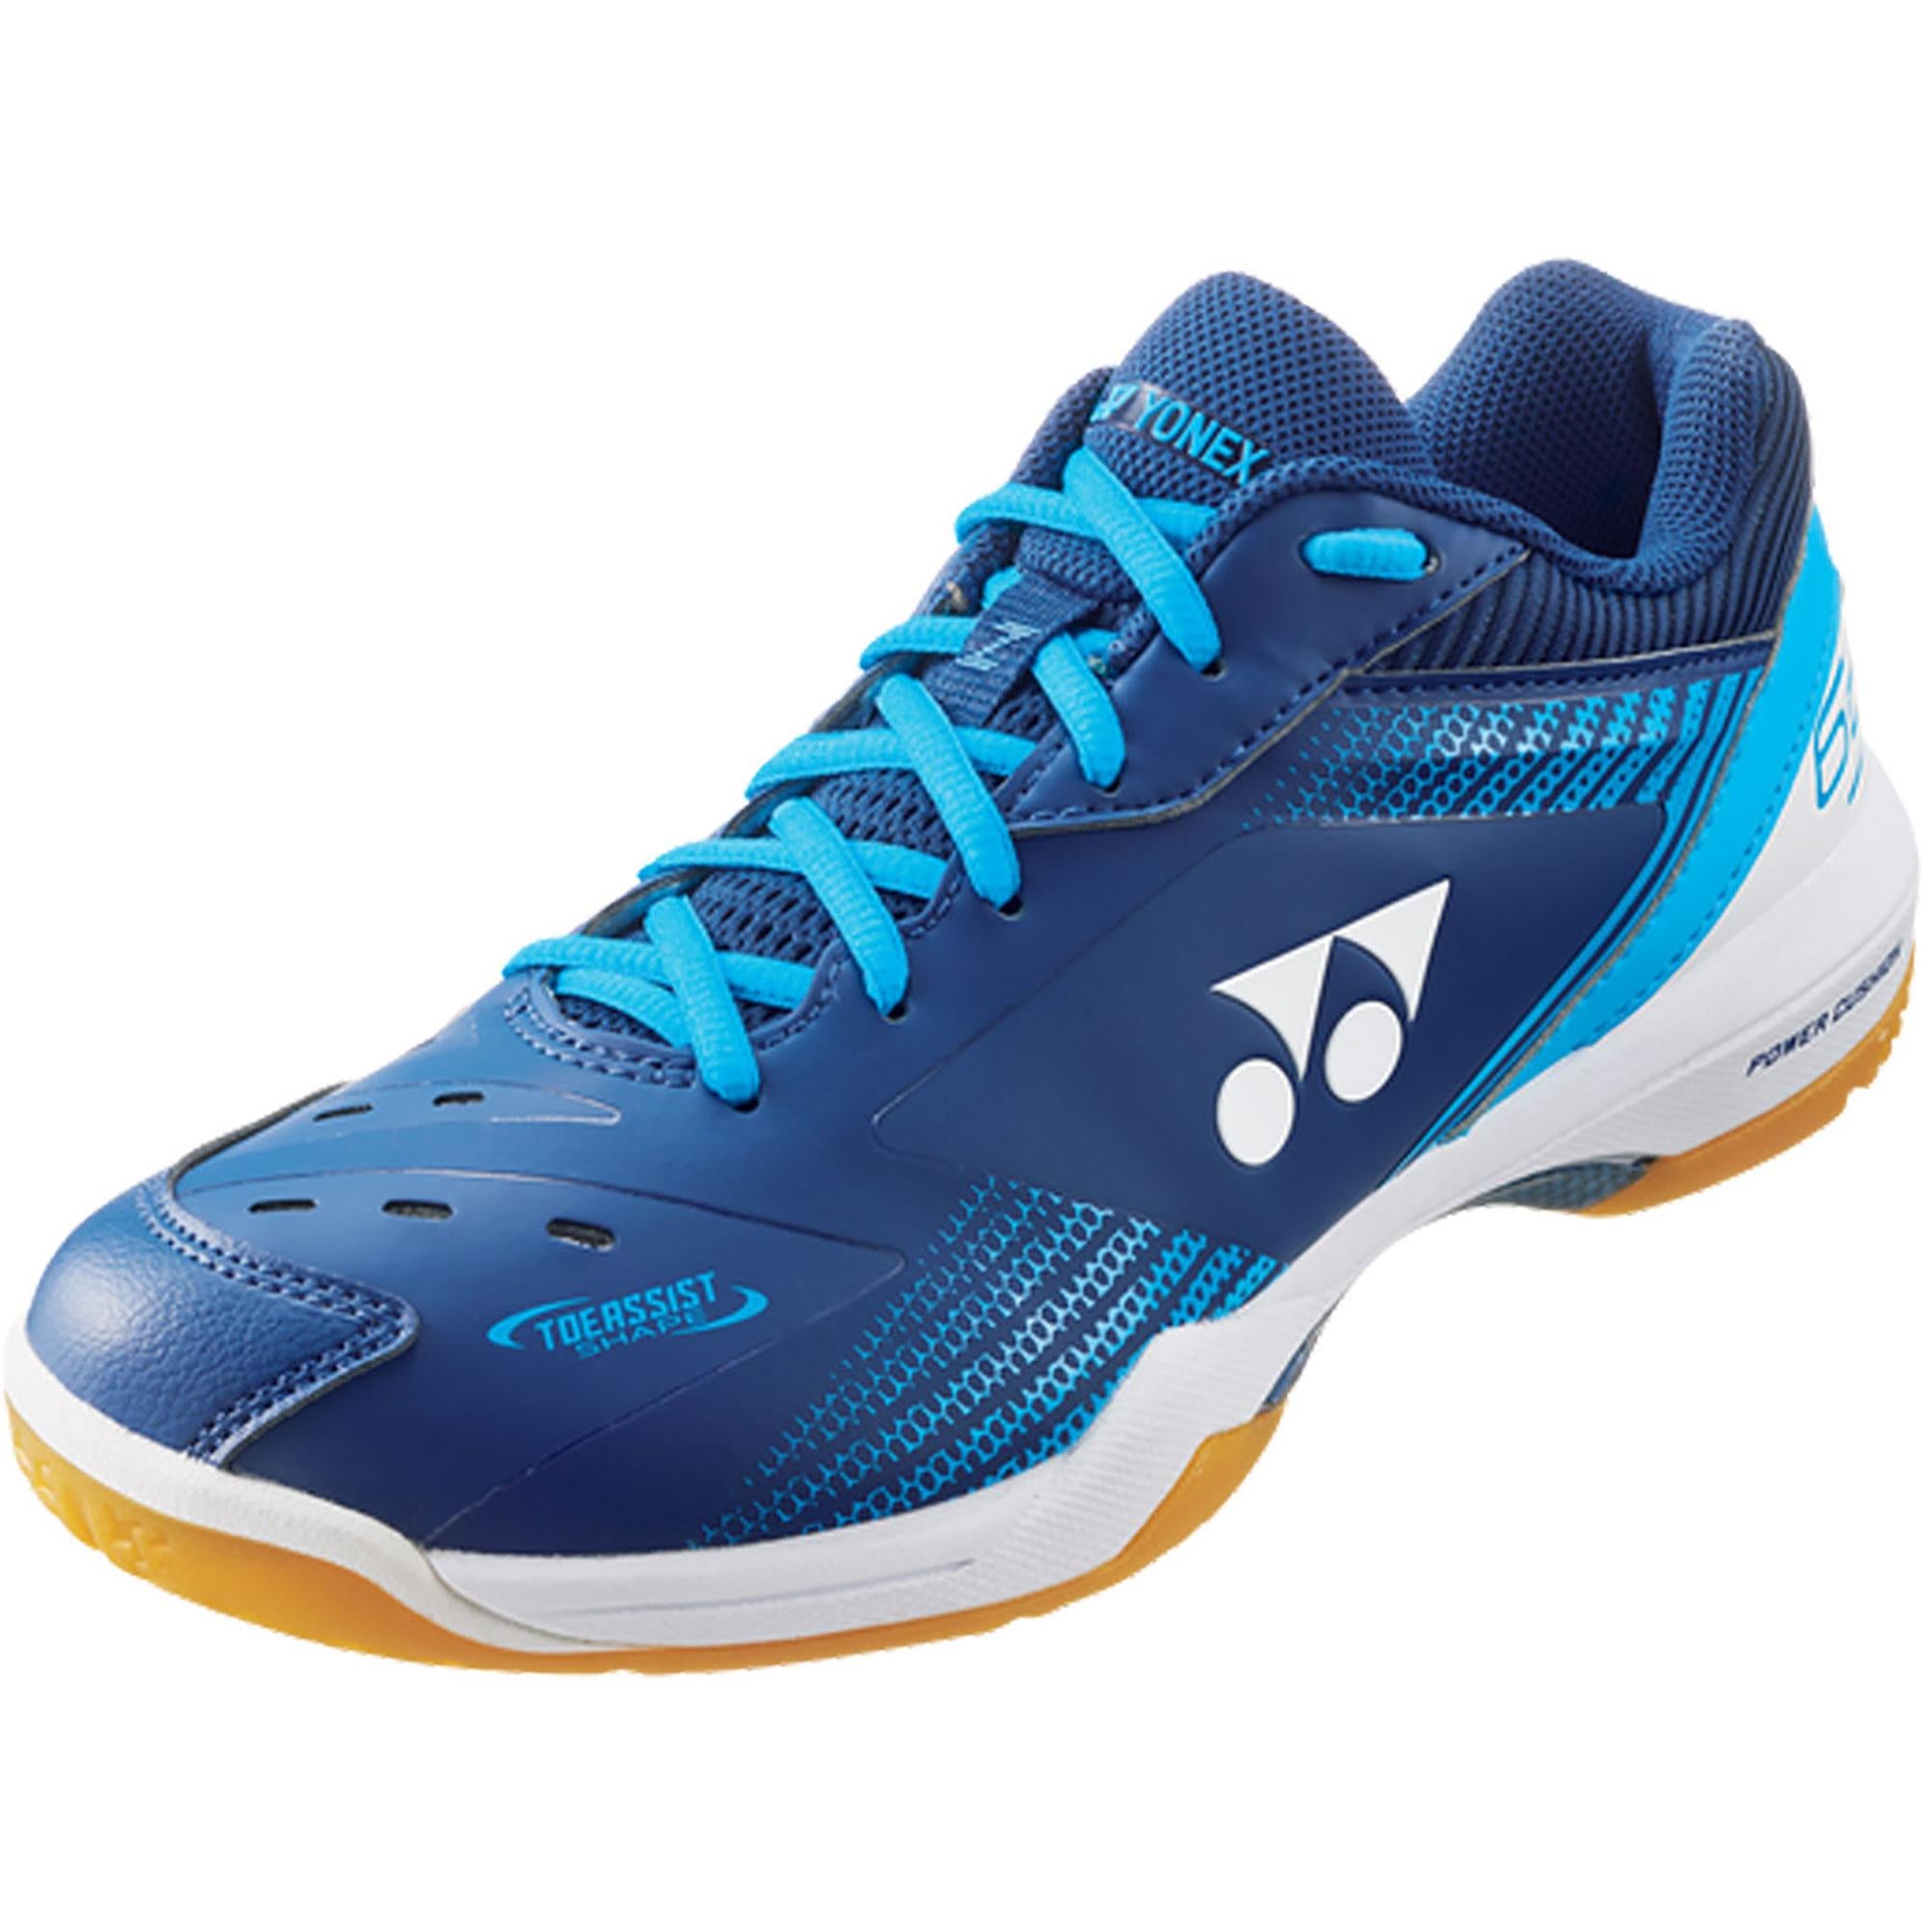 Yonex Power Cushion 65 Z3 Wide Indoor Shoes - Navy Blue